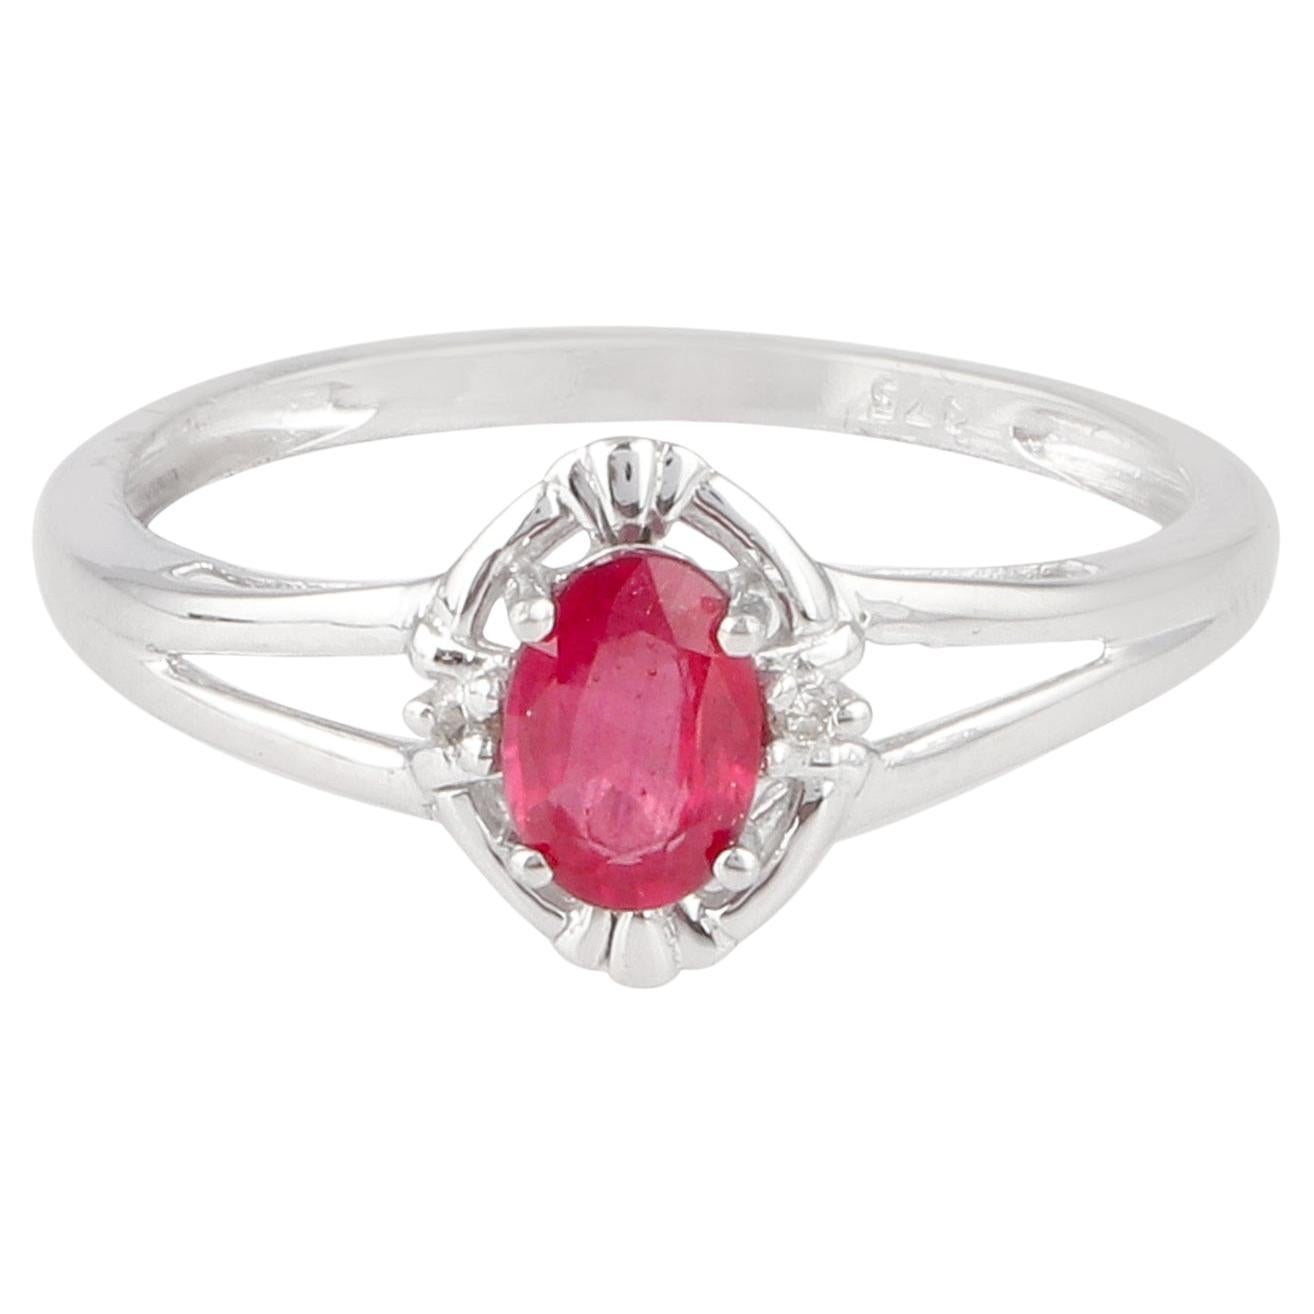 For Sale:  Oval Shape Ruby Gemstone Ring Diamond Pave Solid 9 Karat White Gold Fine Jewelry